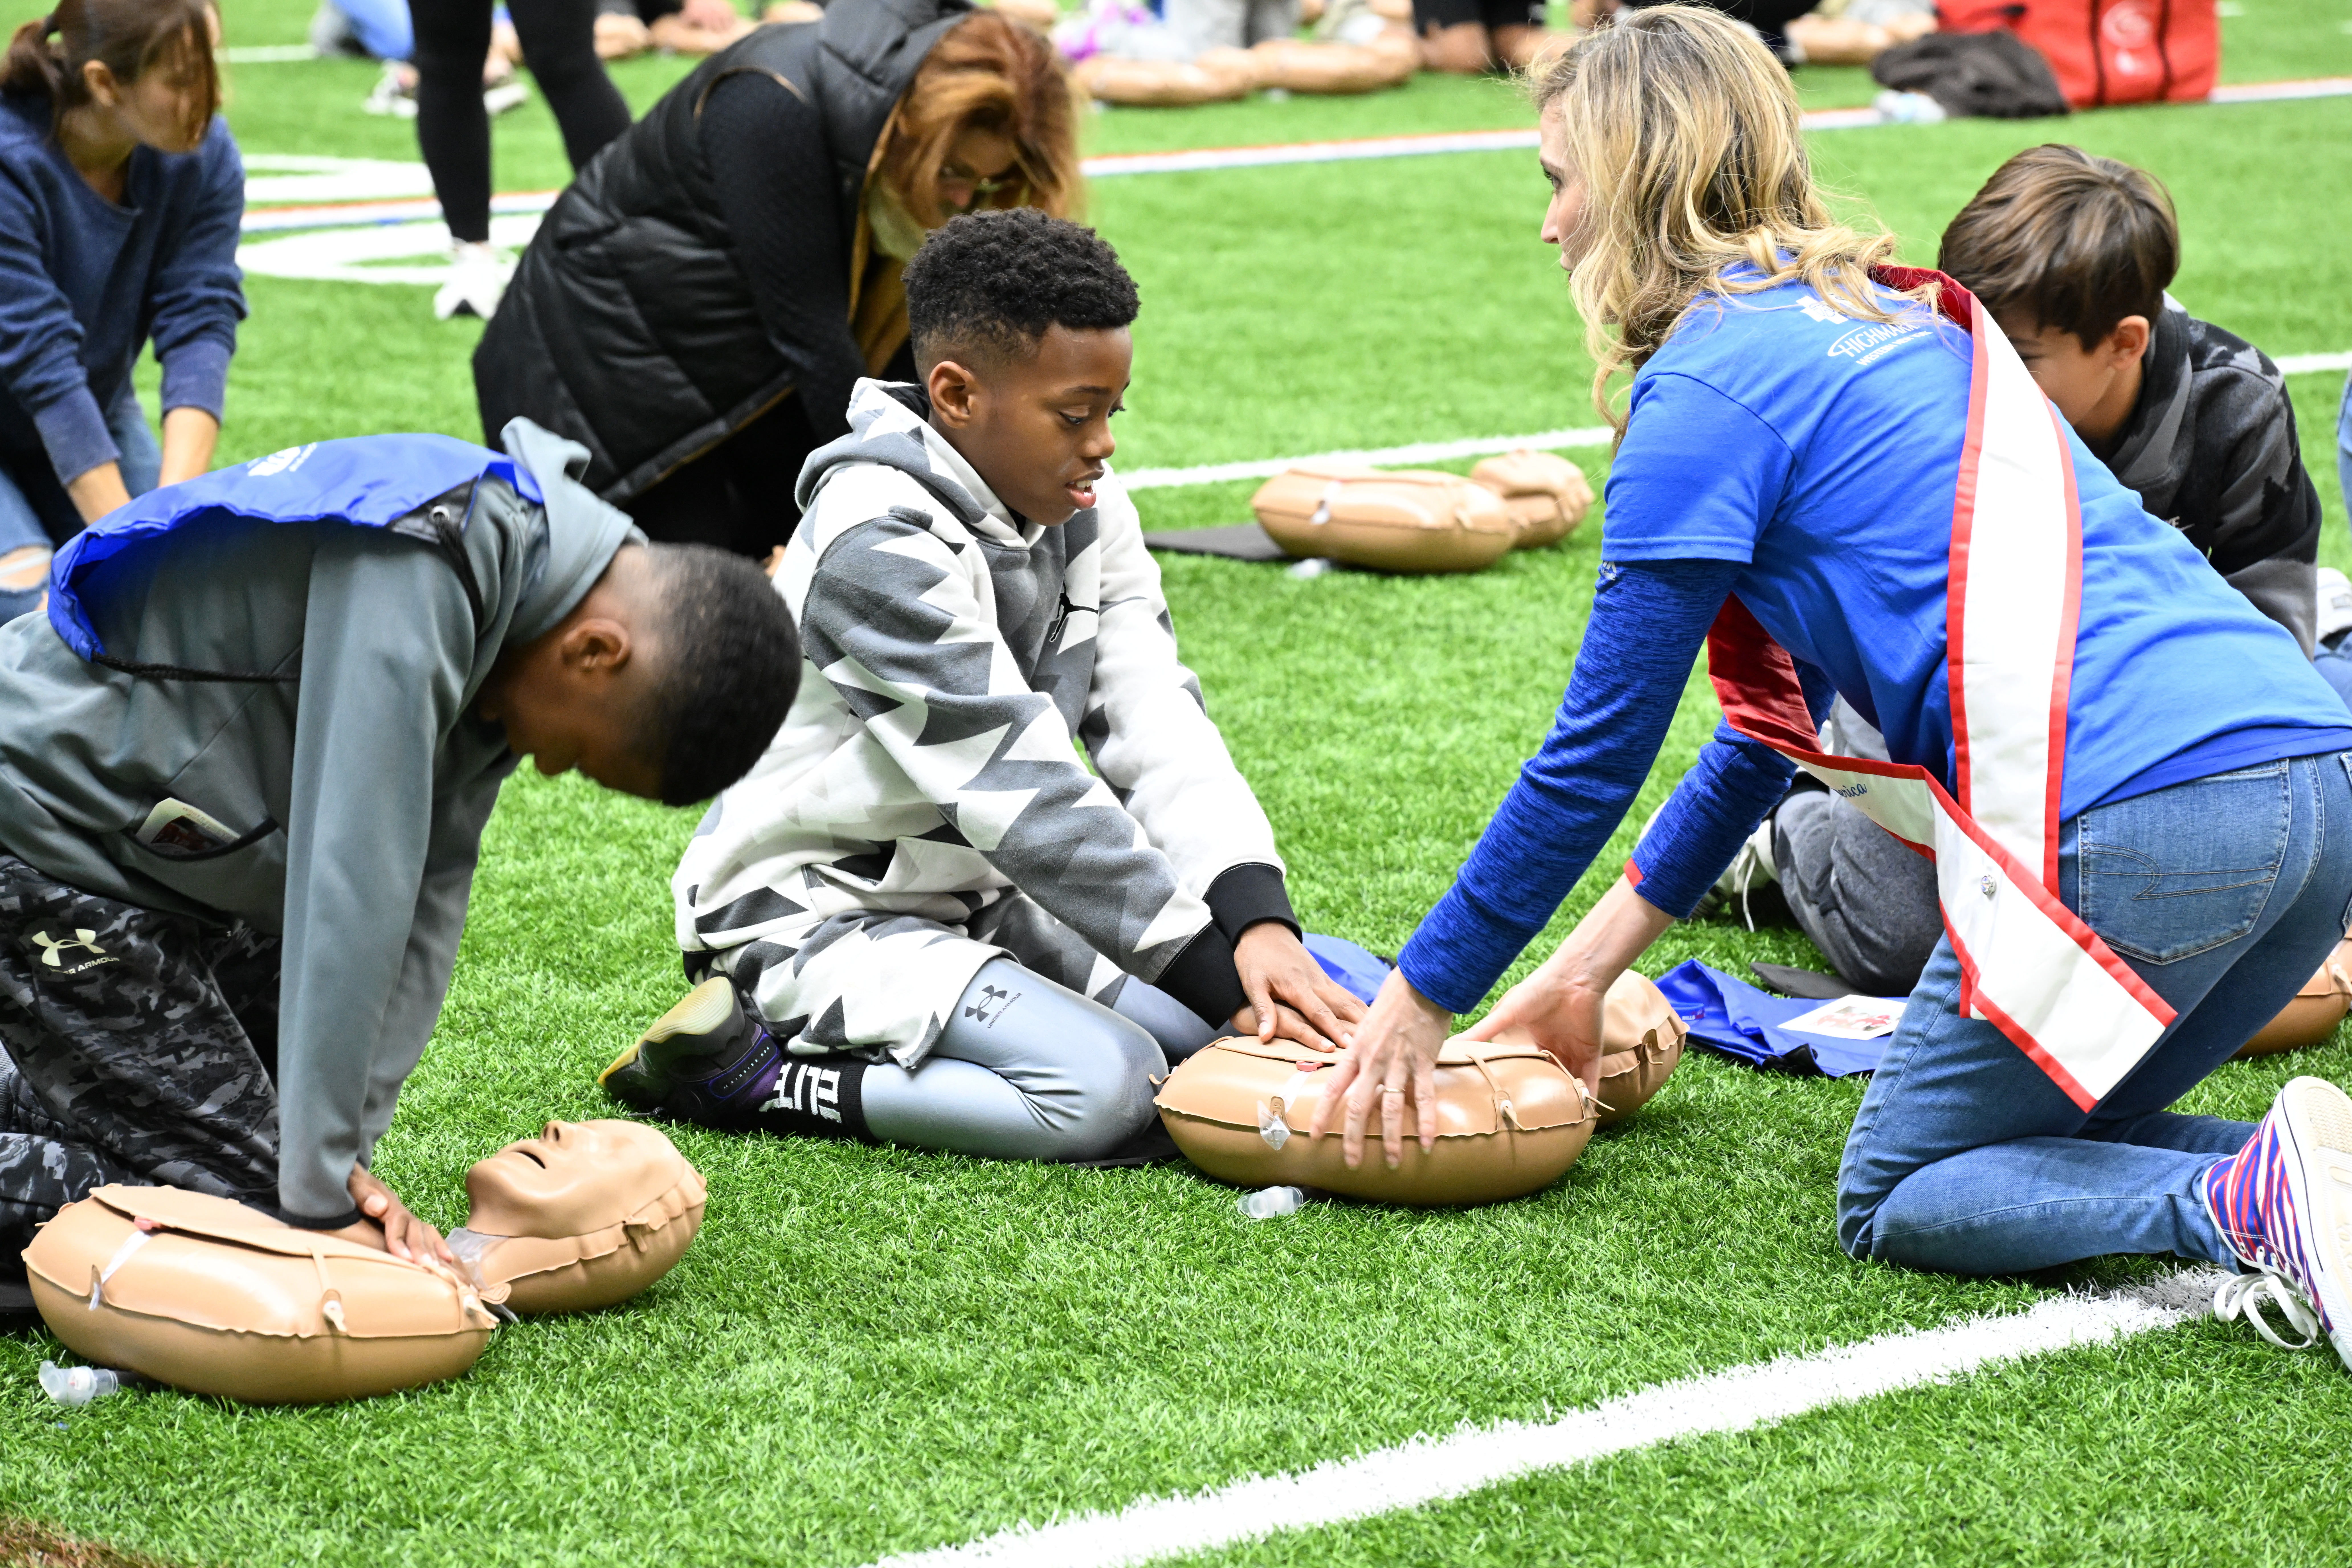 Teaming up for a healthier community – Buffalo CycleNation and Hands-Only CPR demonstrations help fight stroke and heart disease